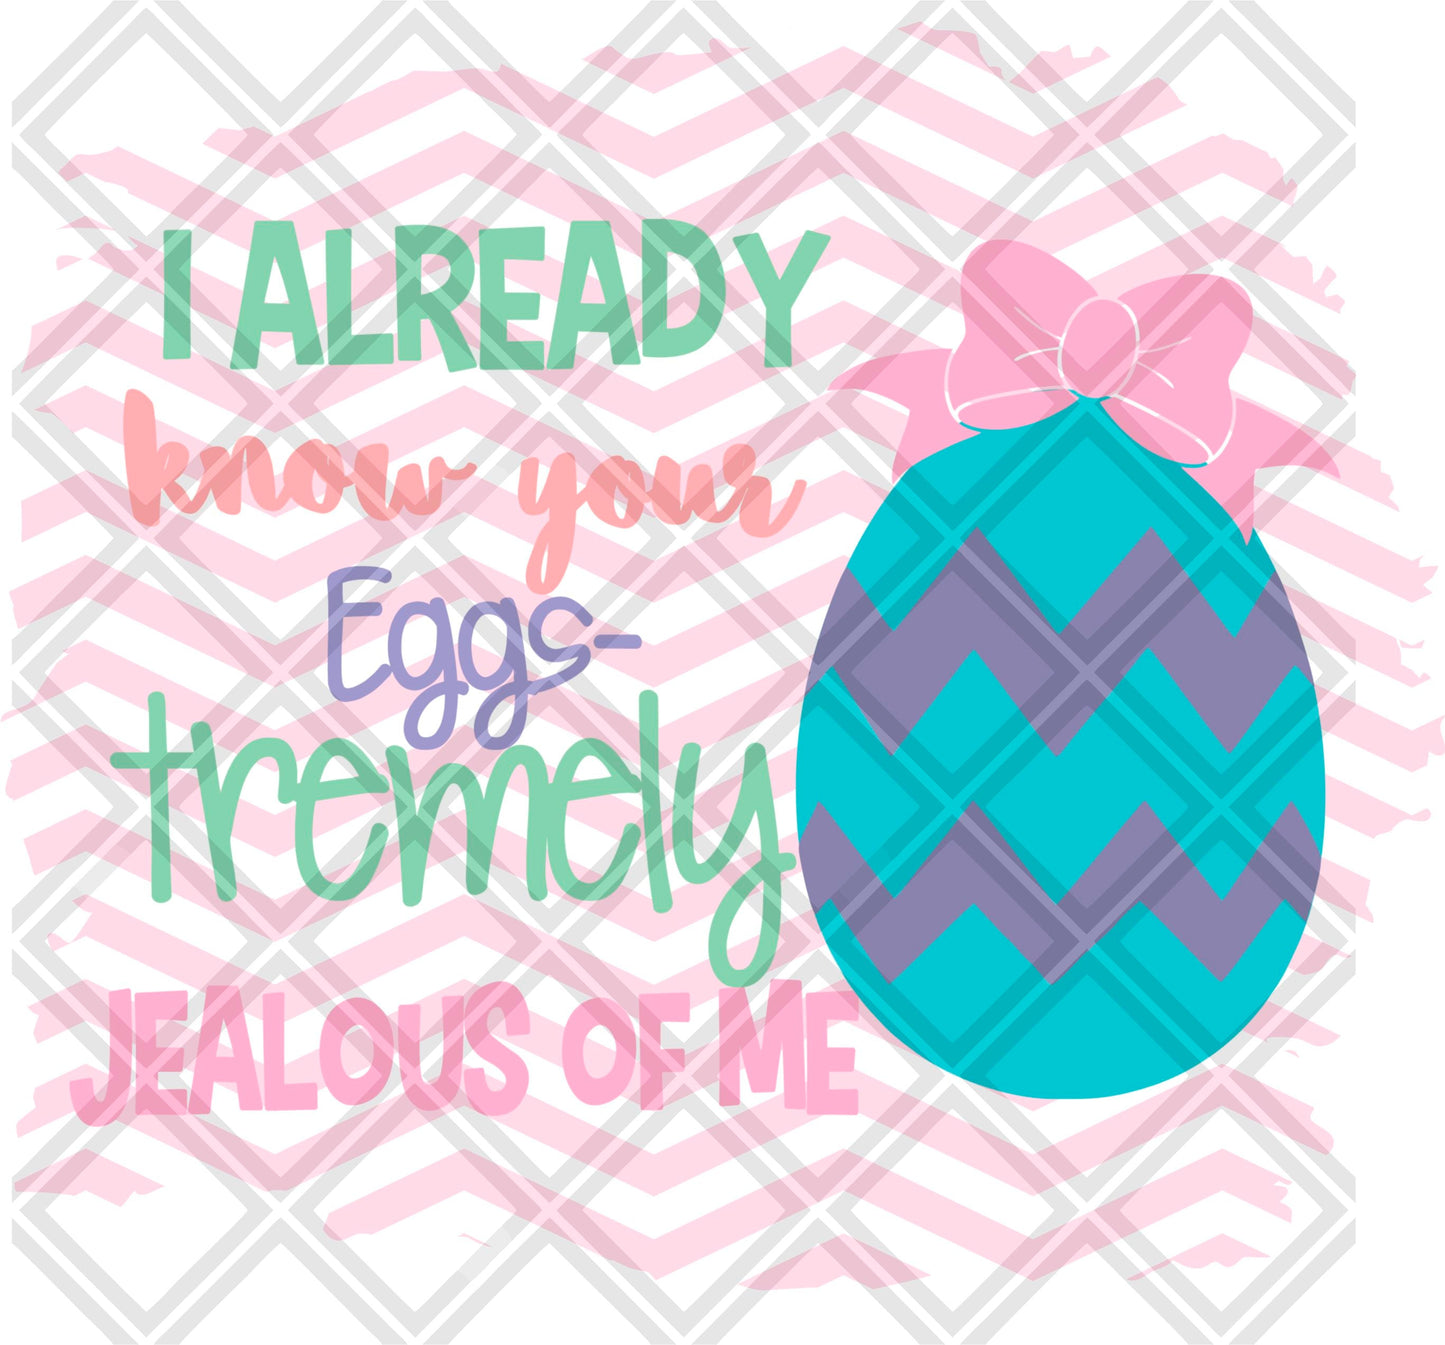 I ALREADY KNOW YOUR EGG TREMELY JEALOUS OF ME png Digital Download Instand Download